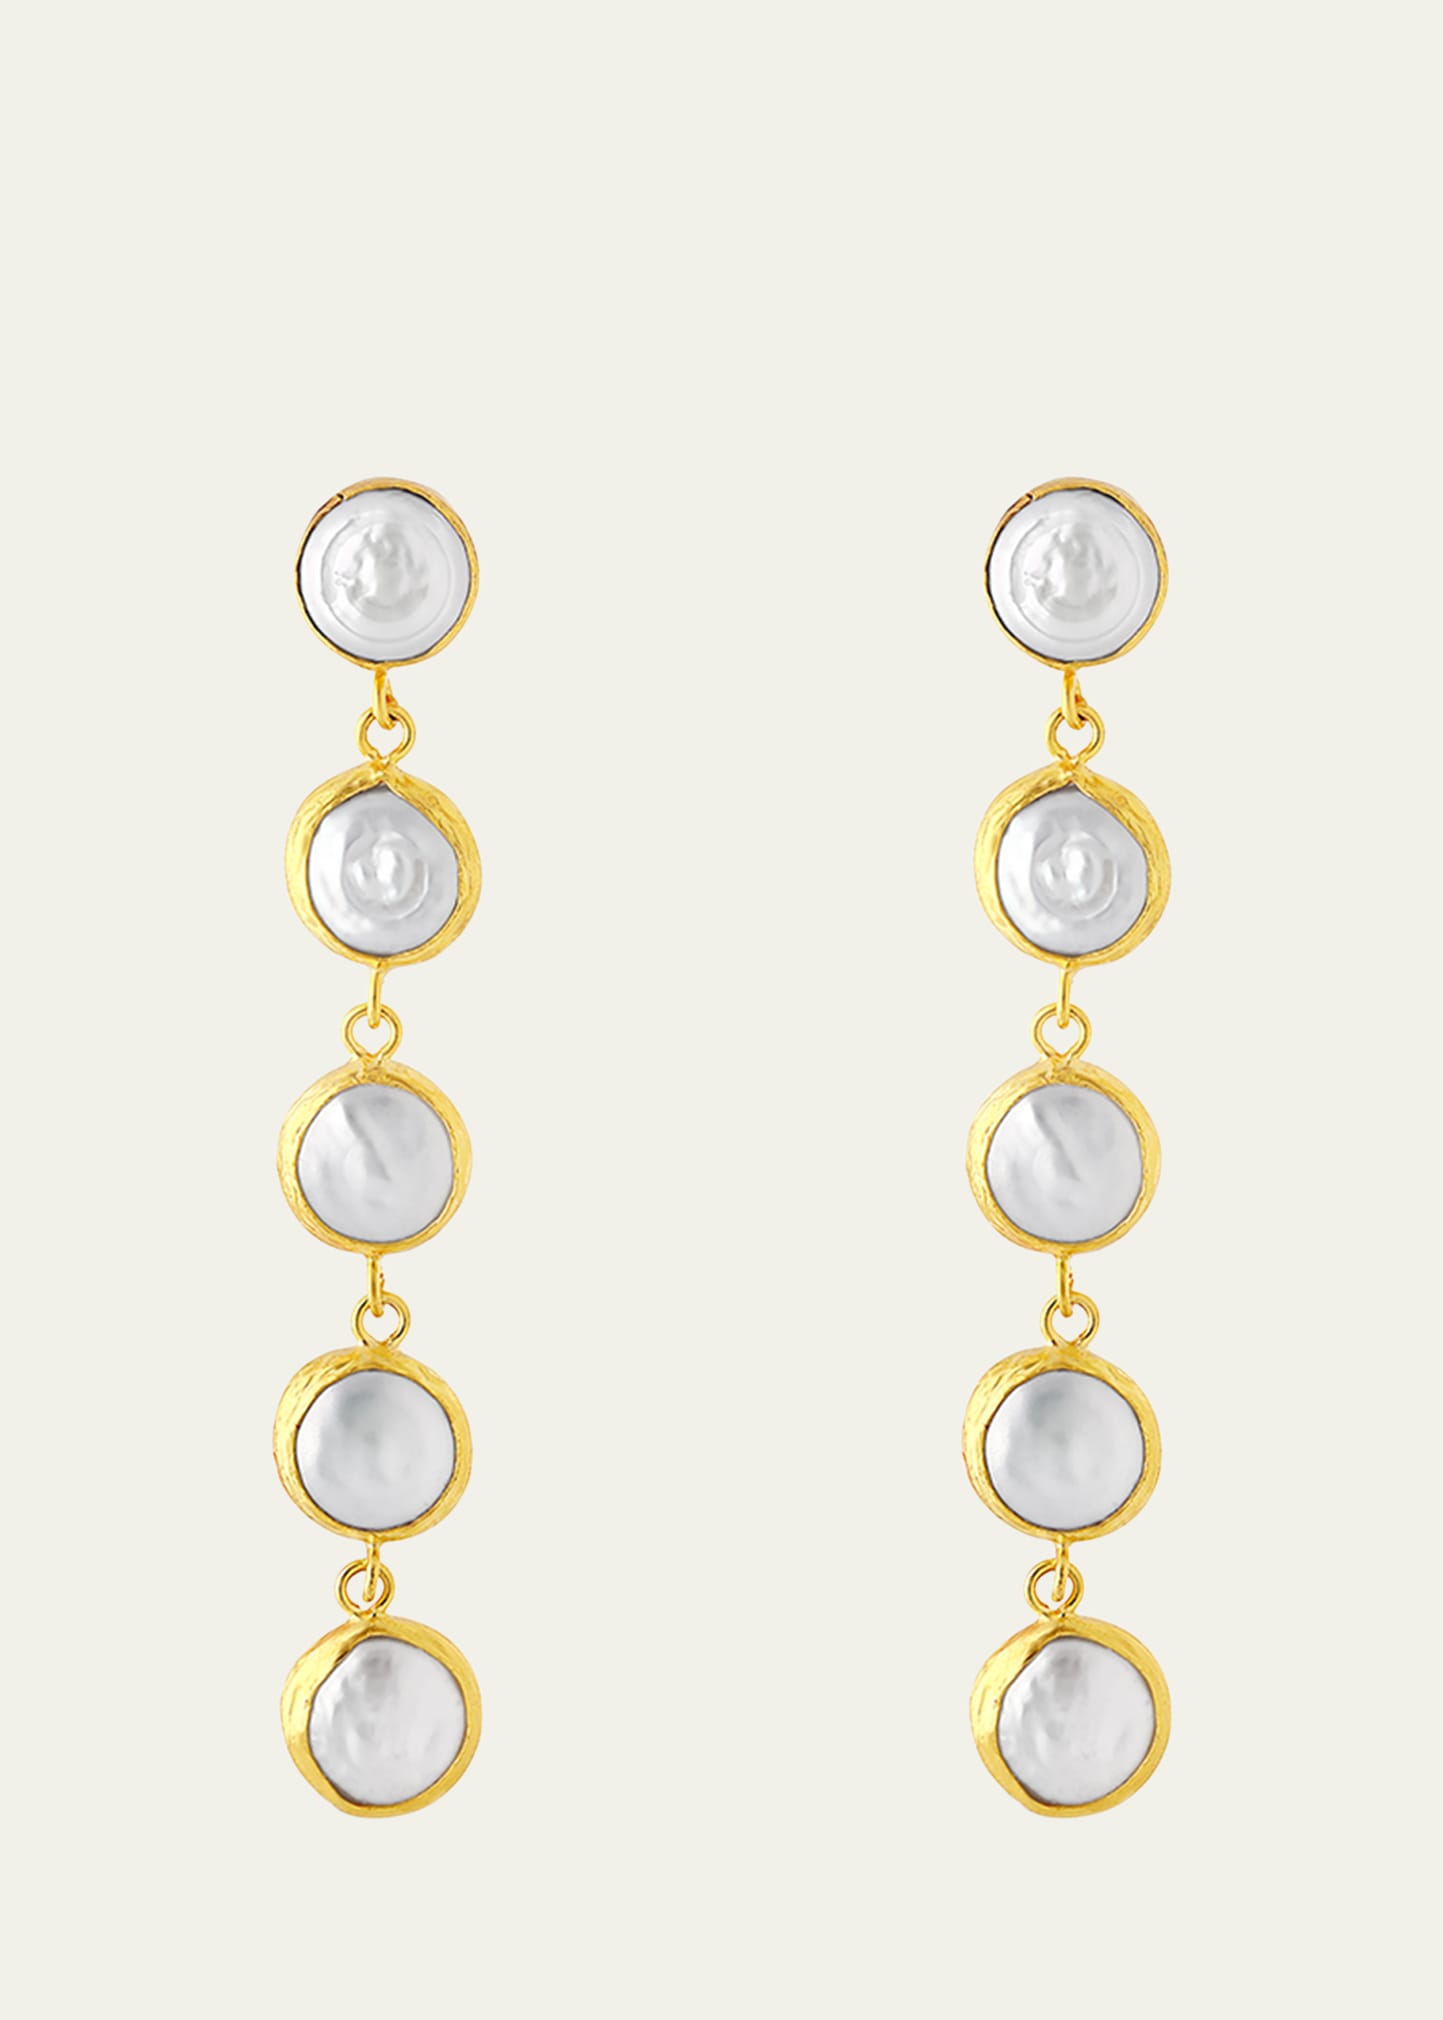 18K Gold Stella Earrings with Freshwater Pearls